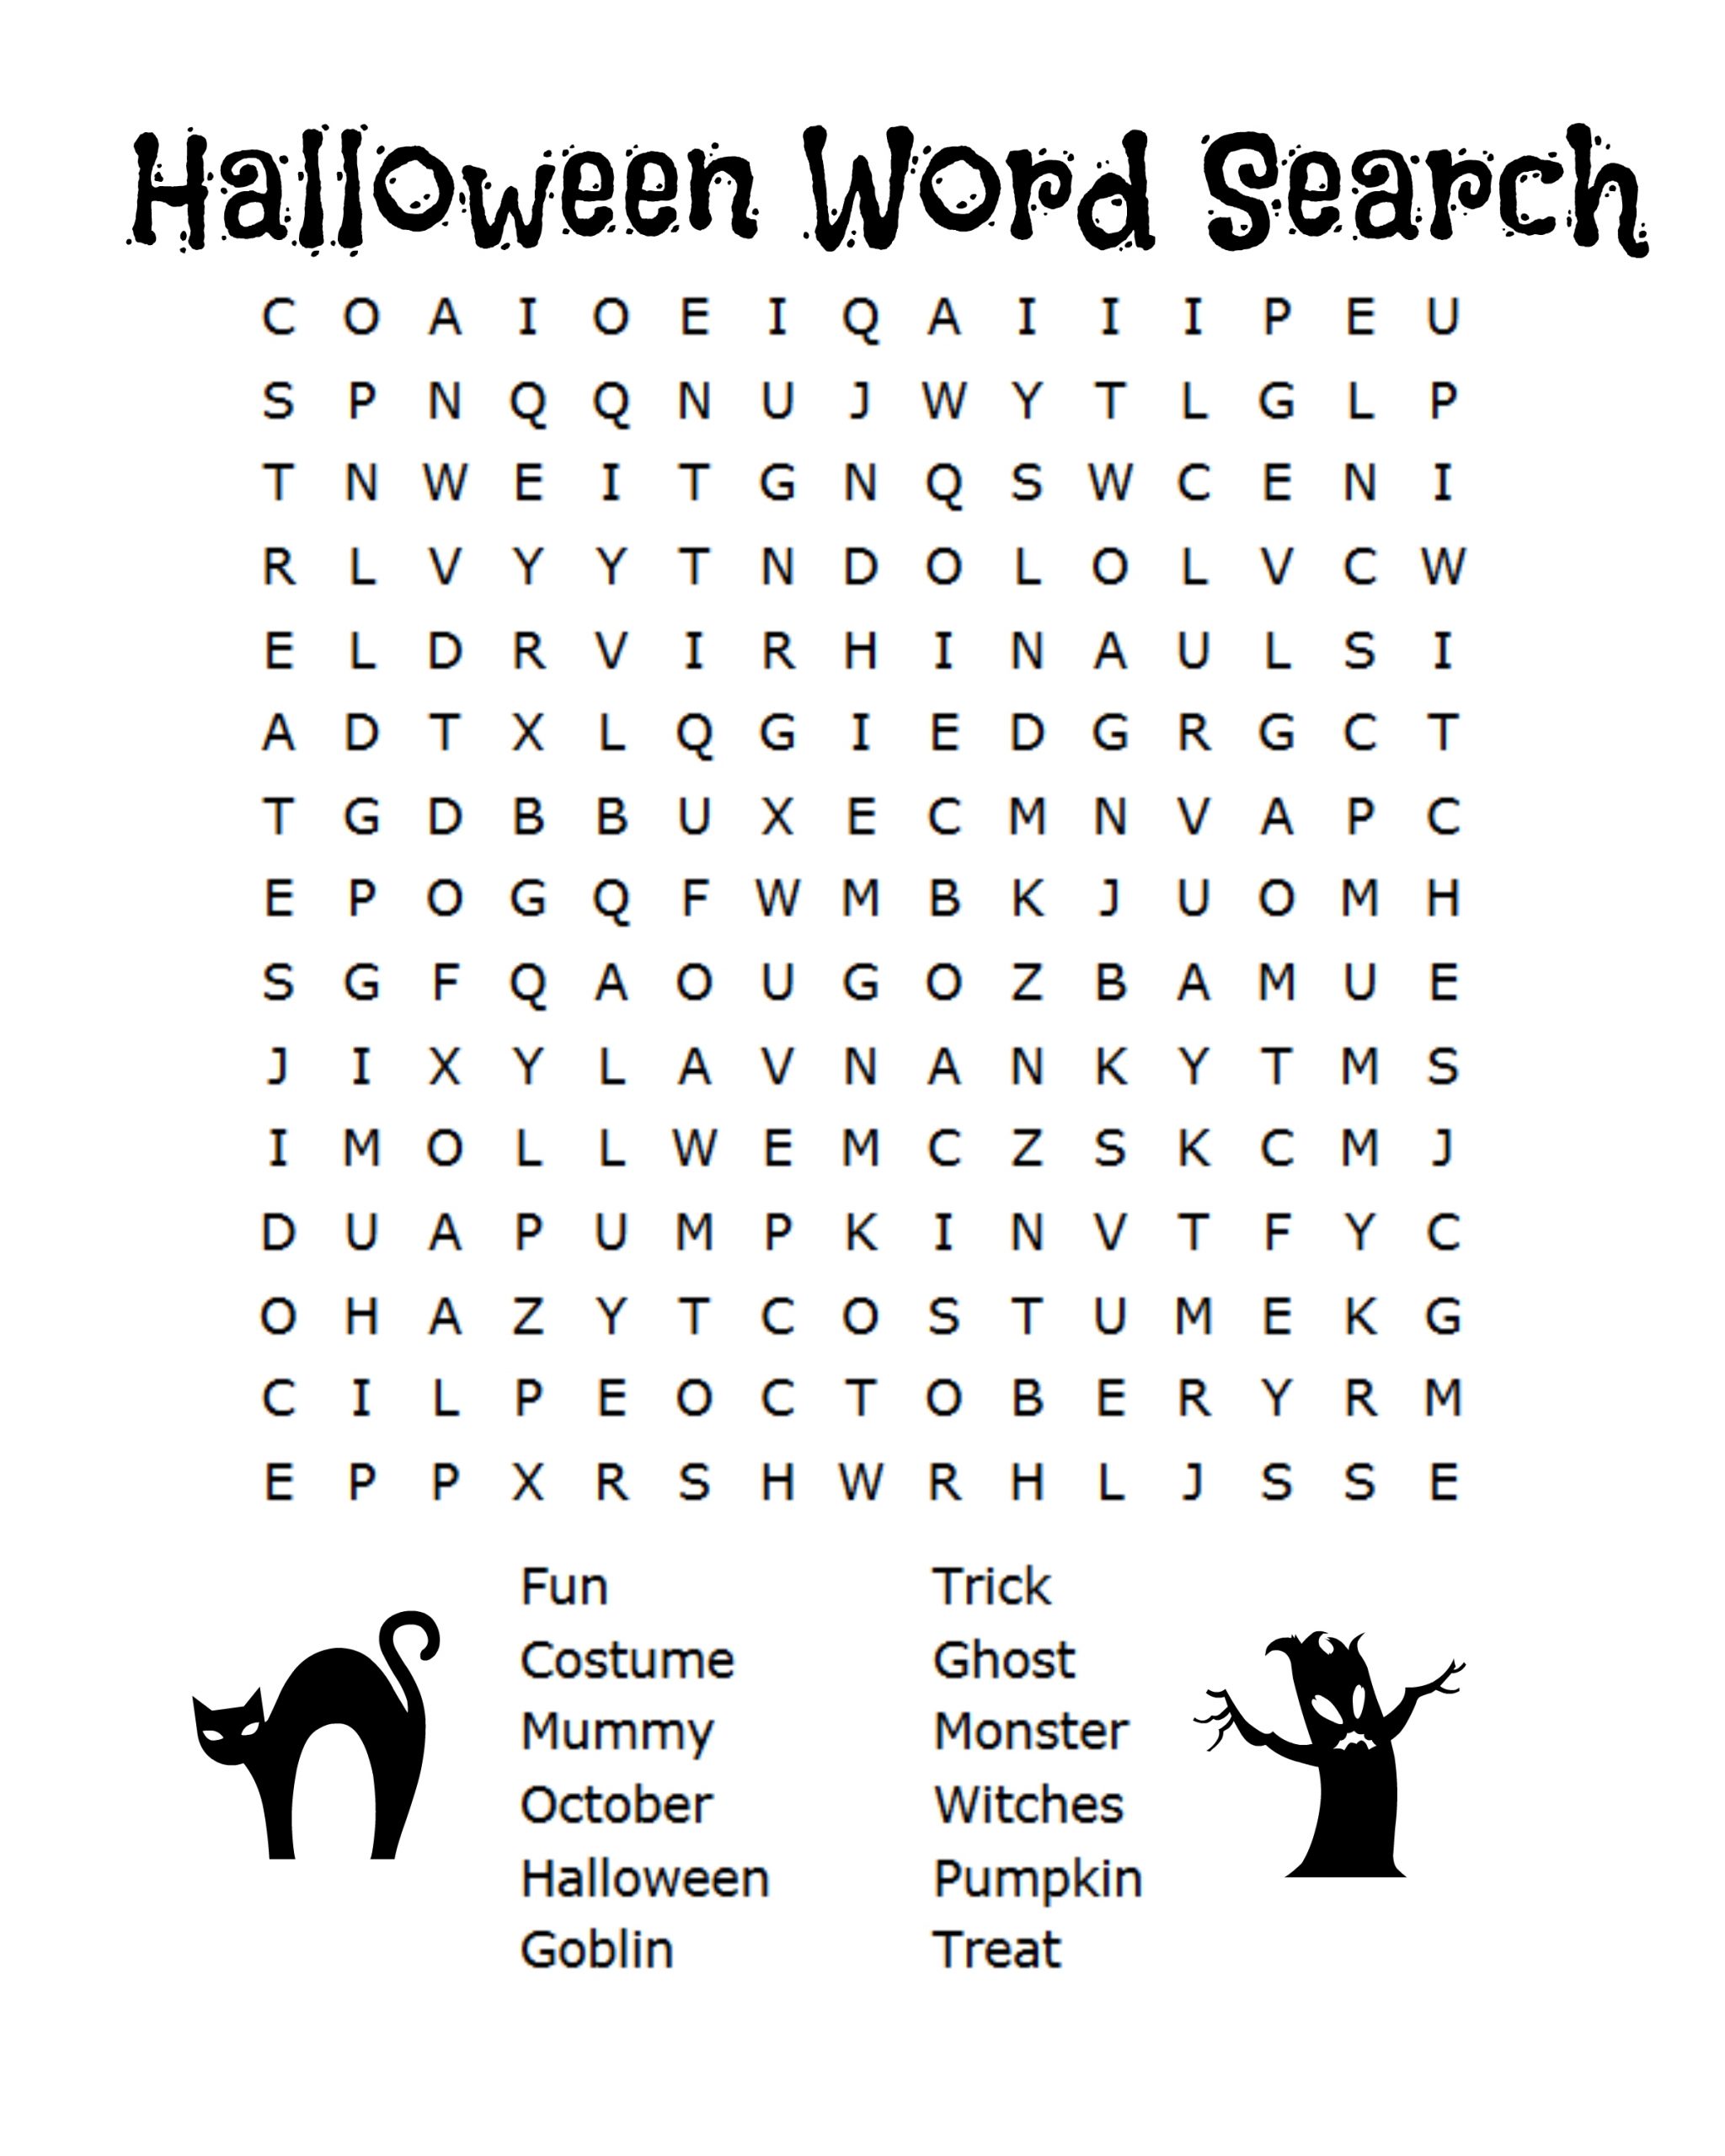 26 Spooky Halloween Word Searches | Kittybabylove